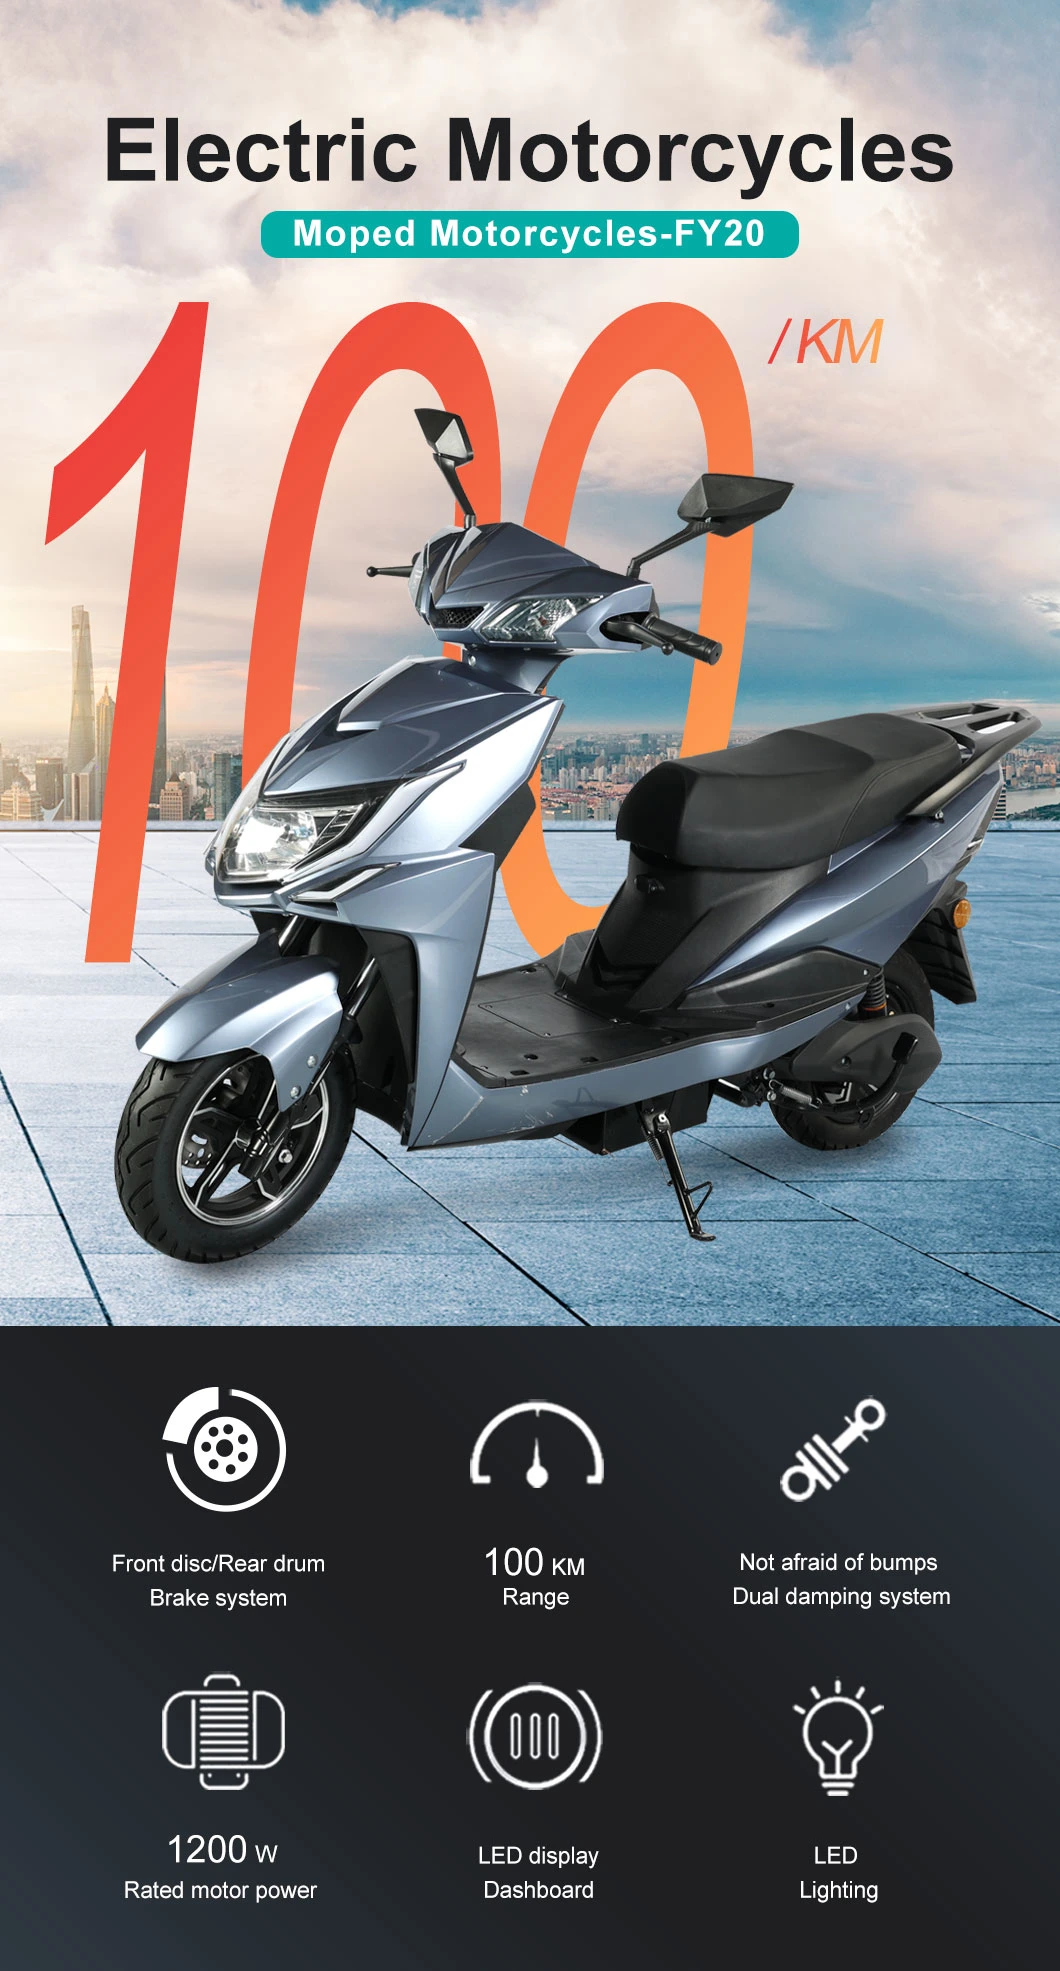 Cheap Price off Sports Electric Moped Motorcycle Scooter Electrical Cycle Good Design Best OEM Branding CKD/SKD Adult Electric Motorcycle